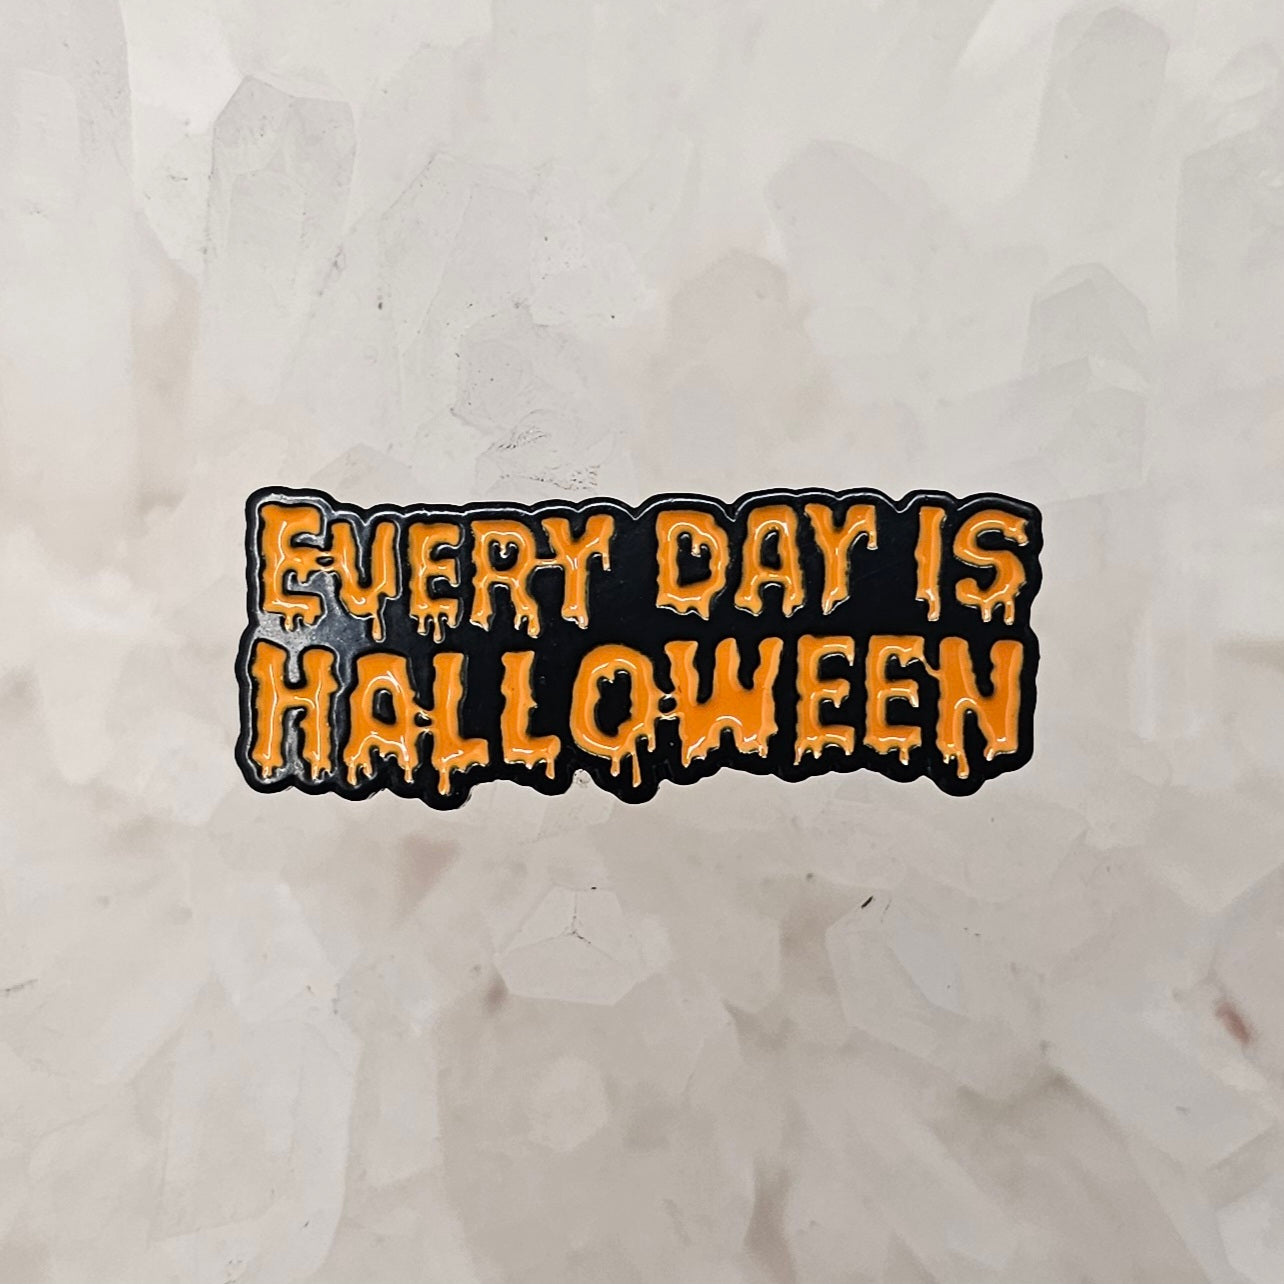 Every Day Is Halloween Horror Thriller Scary Movie Enamel Pins Hat Pins Lapel Pin Brooch Badge Festival Pin